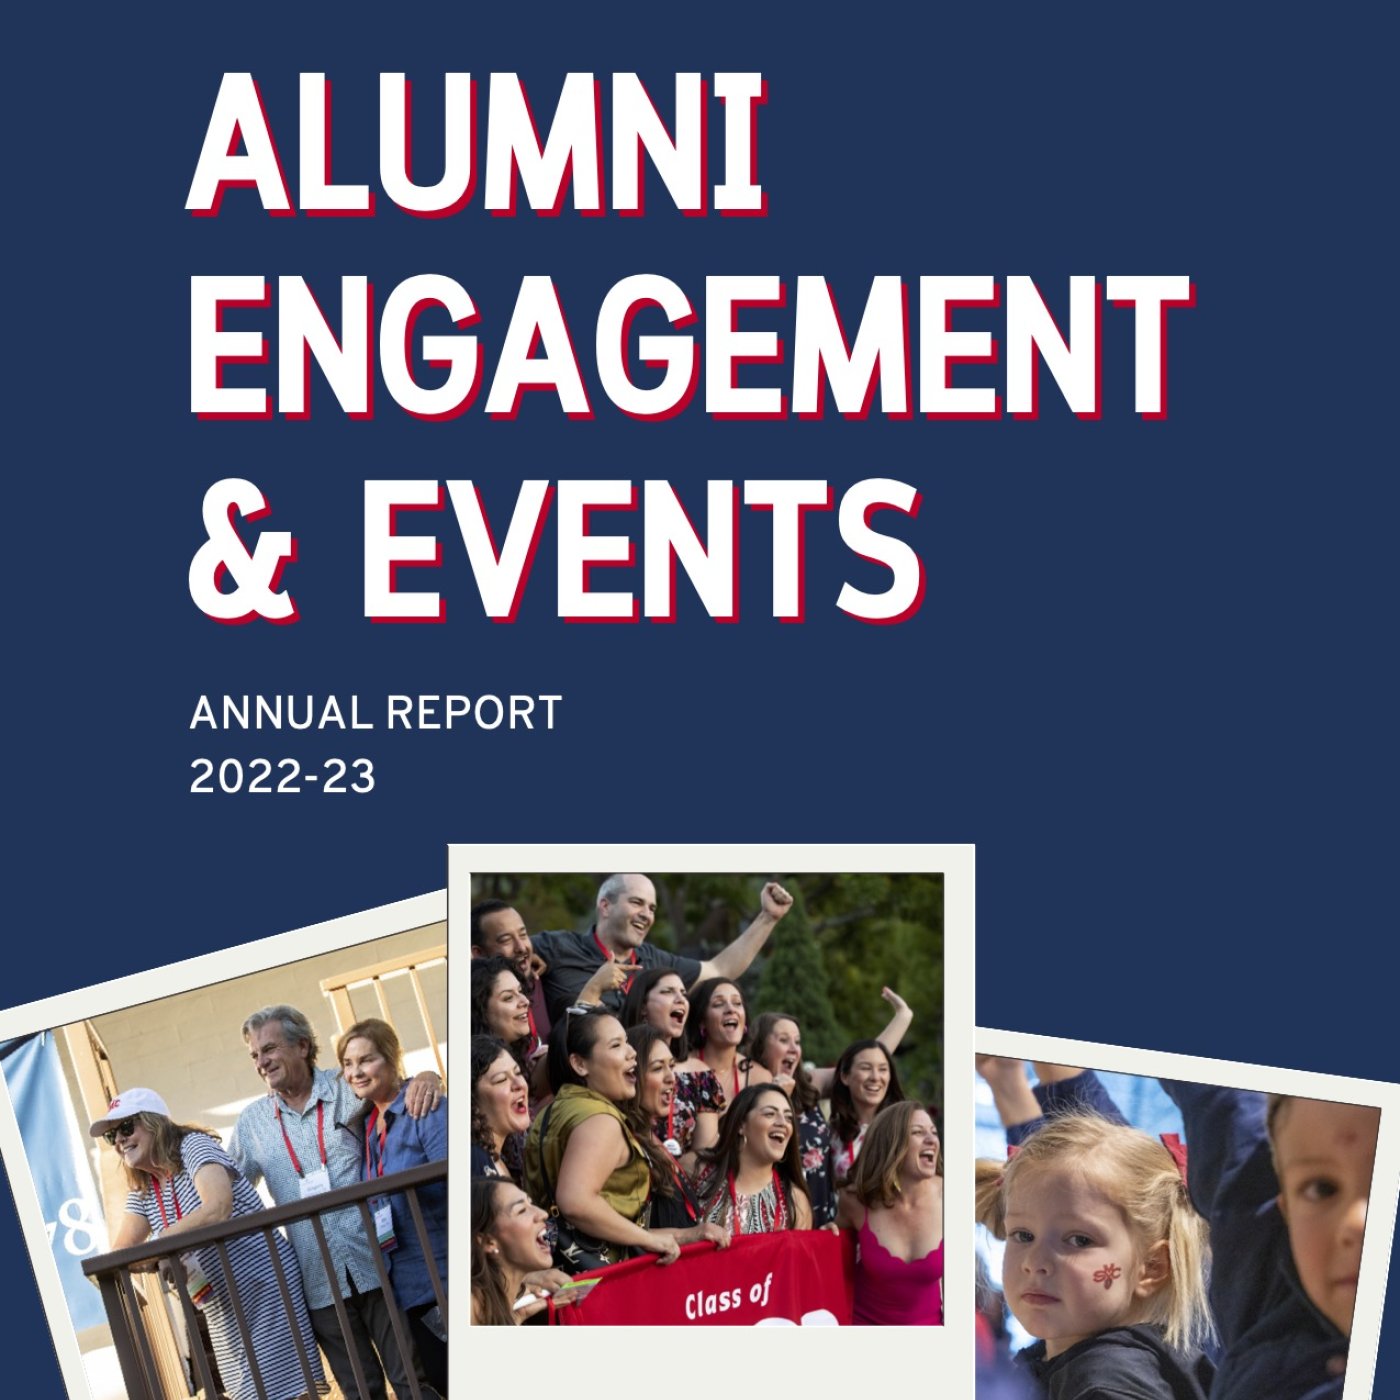 Image of cover reading "Alumni Engagement & Events: Annual Report 2022-23"